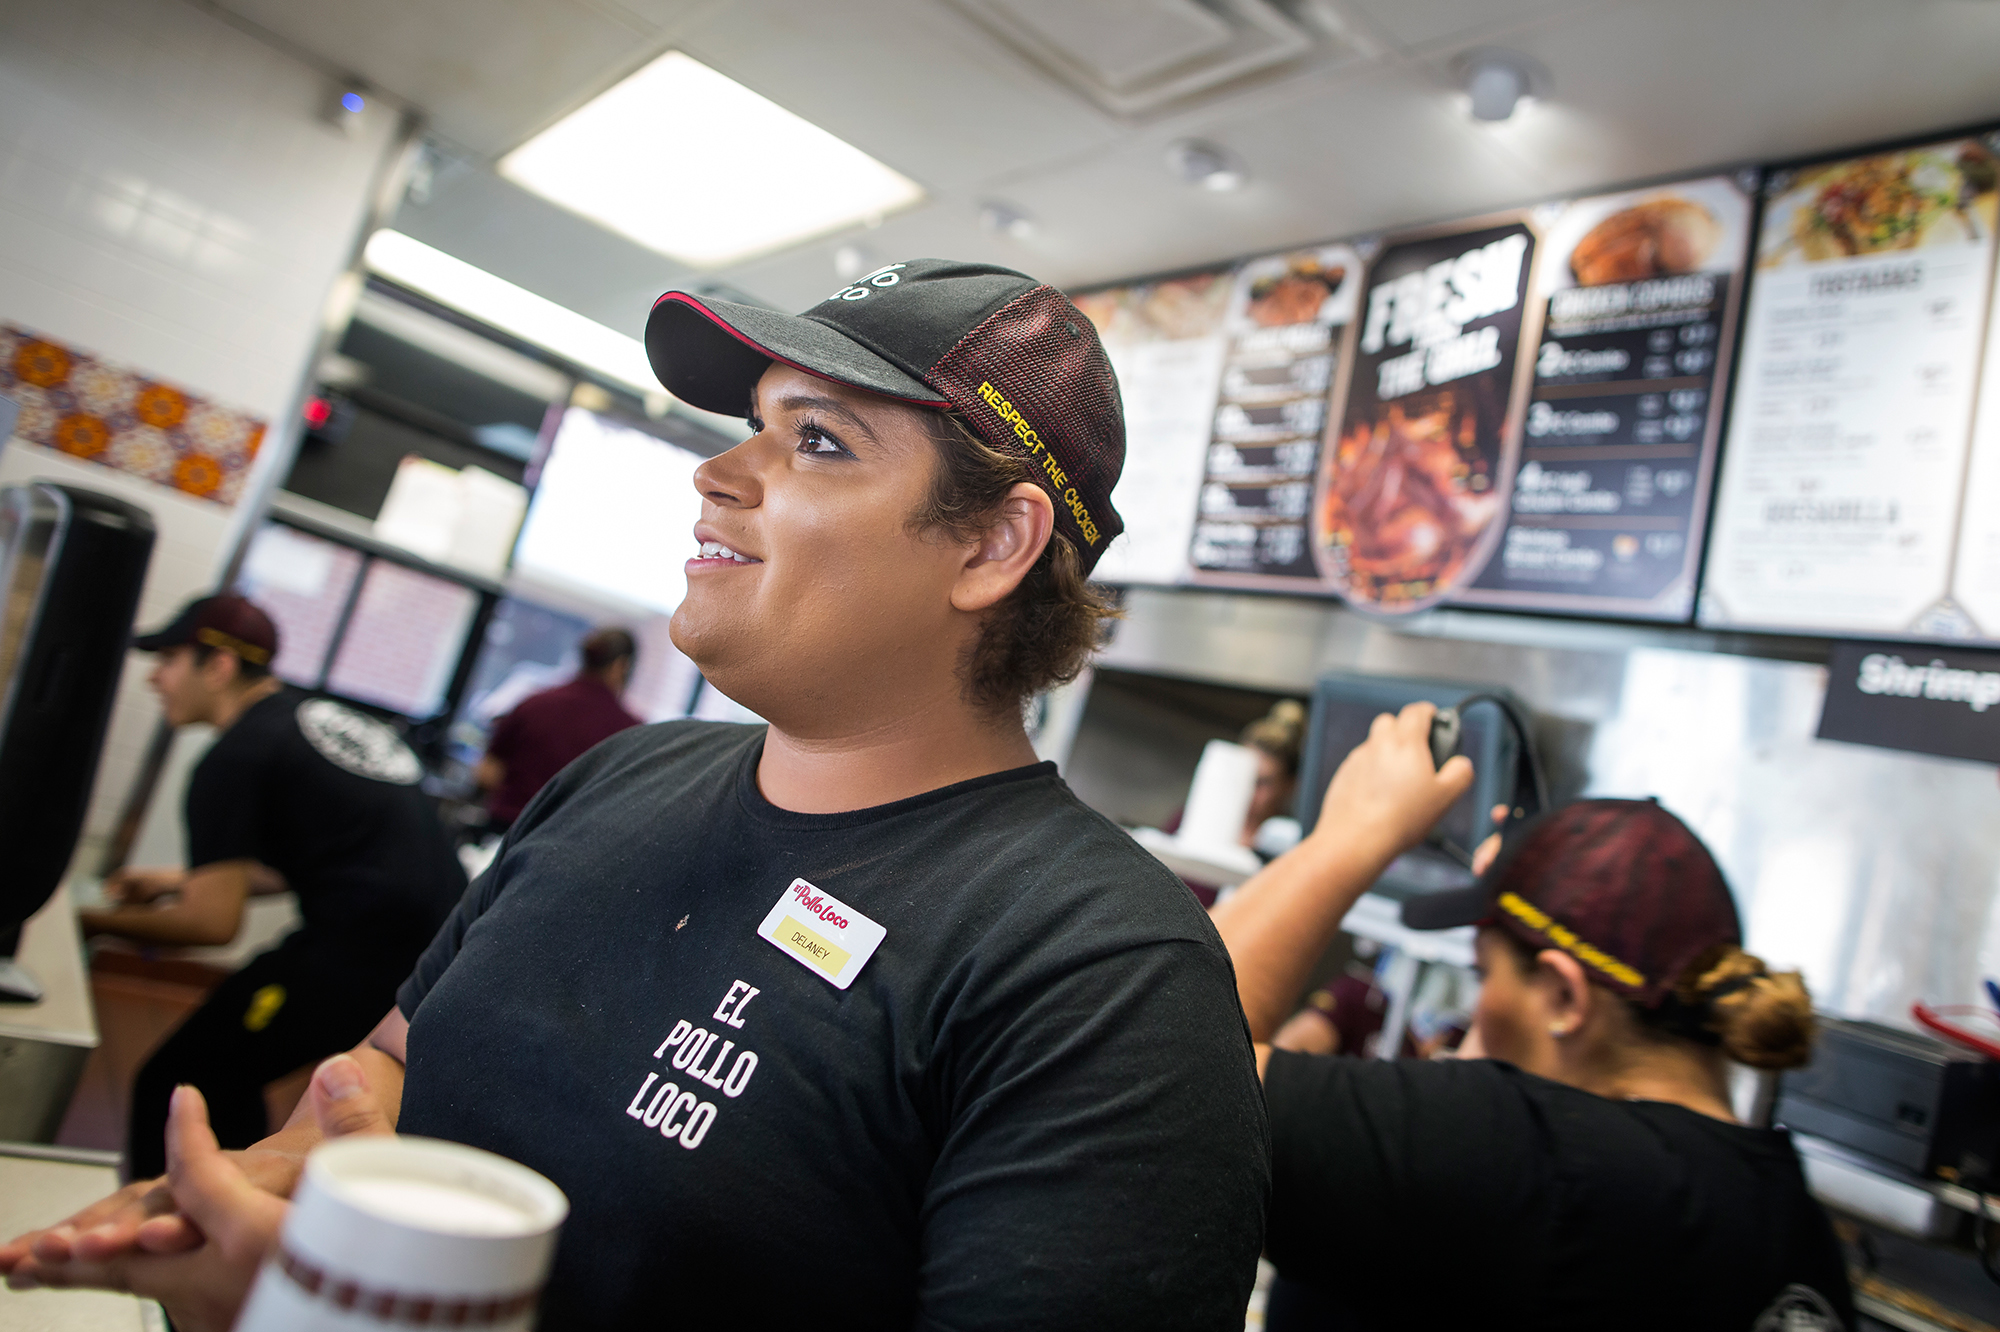 Delaney Martinez recently started working at this Southern California El Pollo Loco owned by Mendelsohn. "I feel like it's a supportive atmosphere," Martinez says.